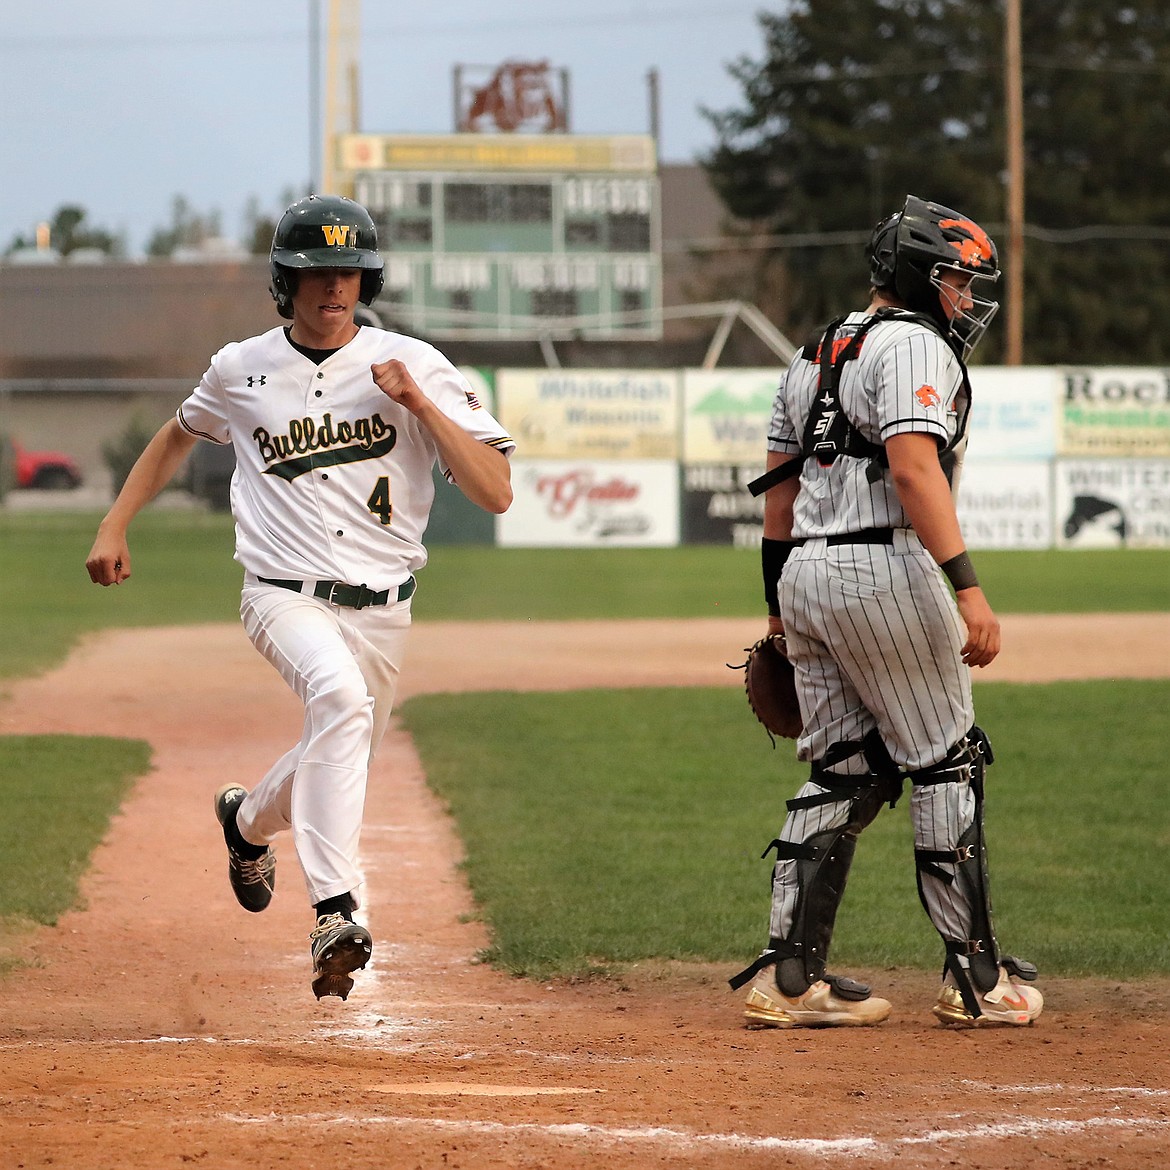 Whitefish's Maddox Muller scores a run in a game against Eureka on Tuesday, May 2 at Memorial Field. (Greg Nelson photo/Artwestimage.net)